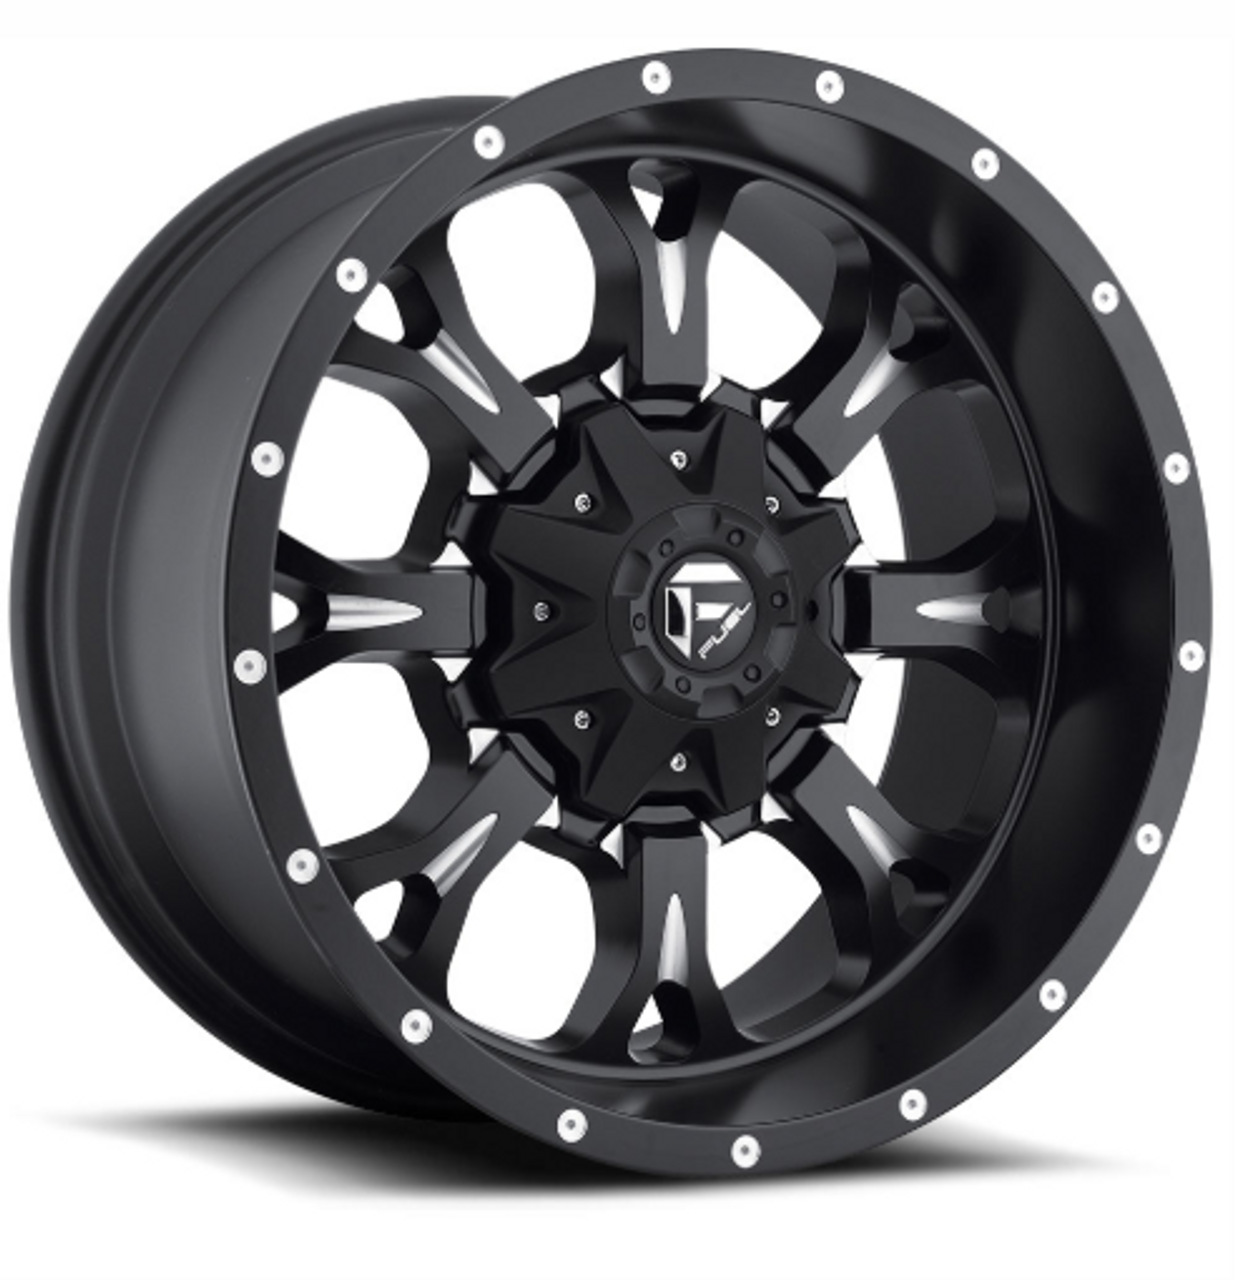 Fuel Krank Wheel 17x9 Black with Machined Accents